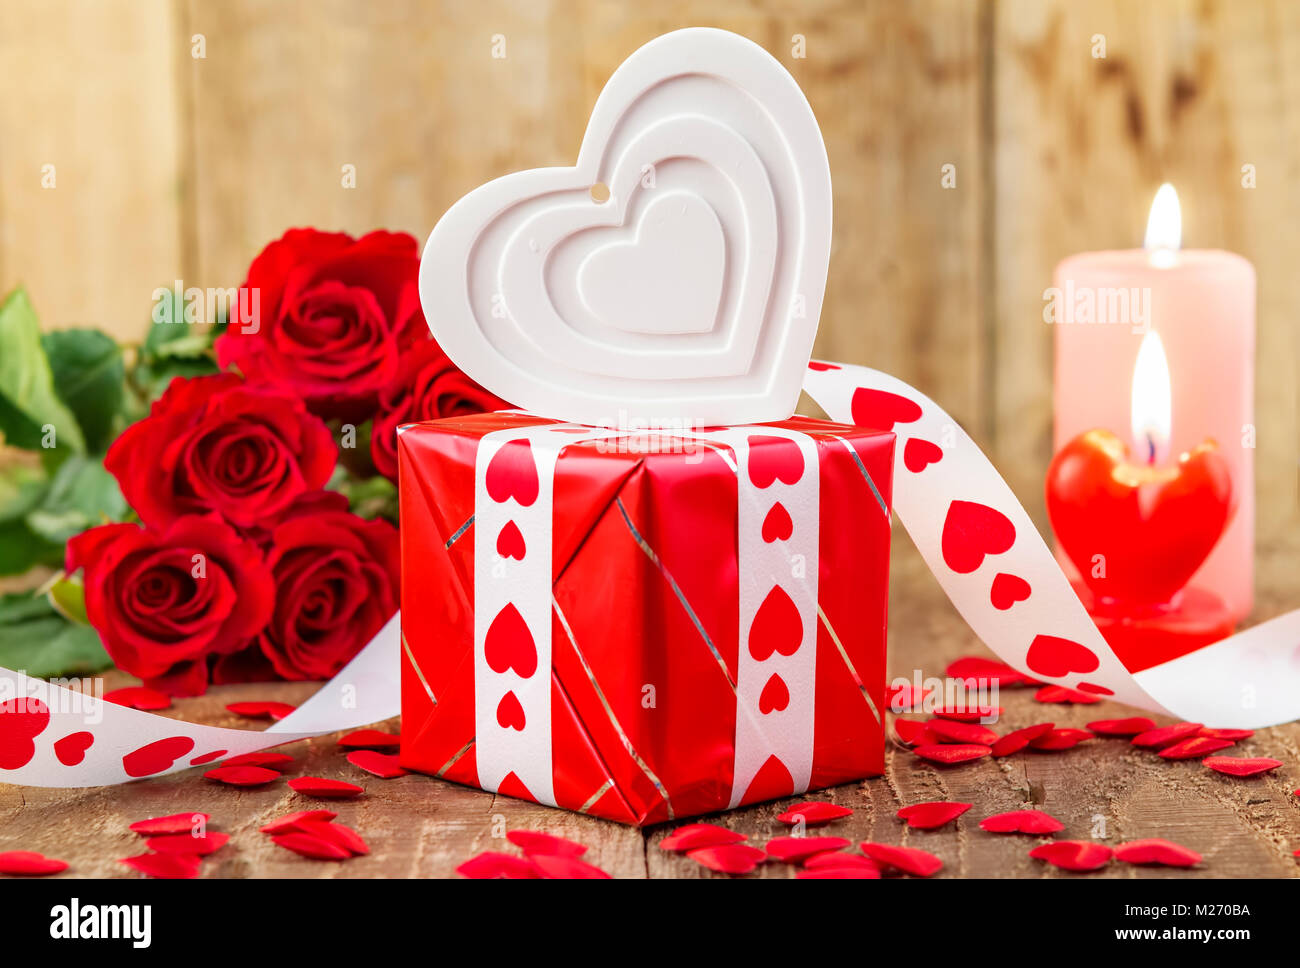 Shape of white heart over gift box in front of bouquet of red roses and candles on wooden background. Valentines day concept. Motherâ€™s day concept.  Stock Photo